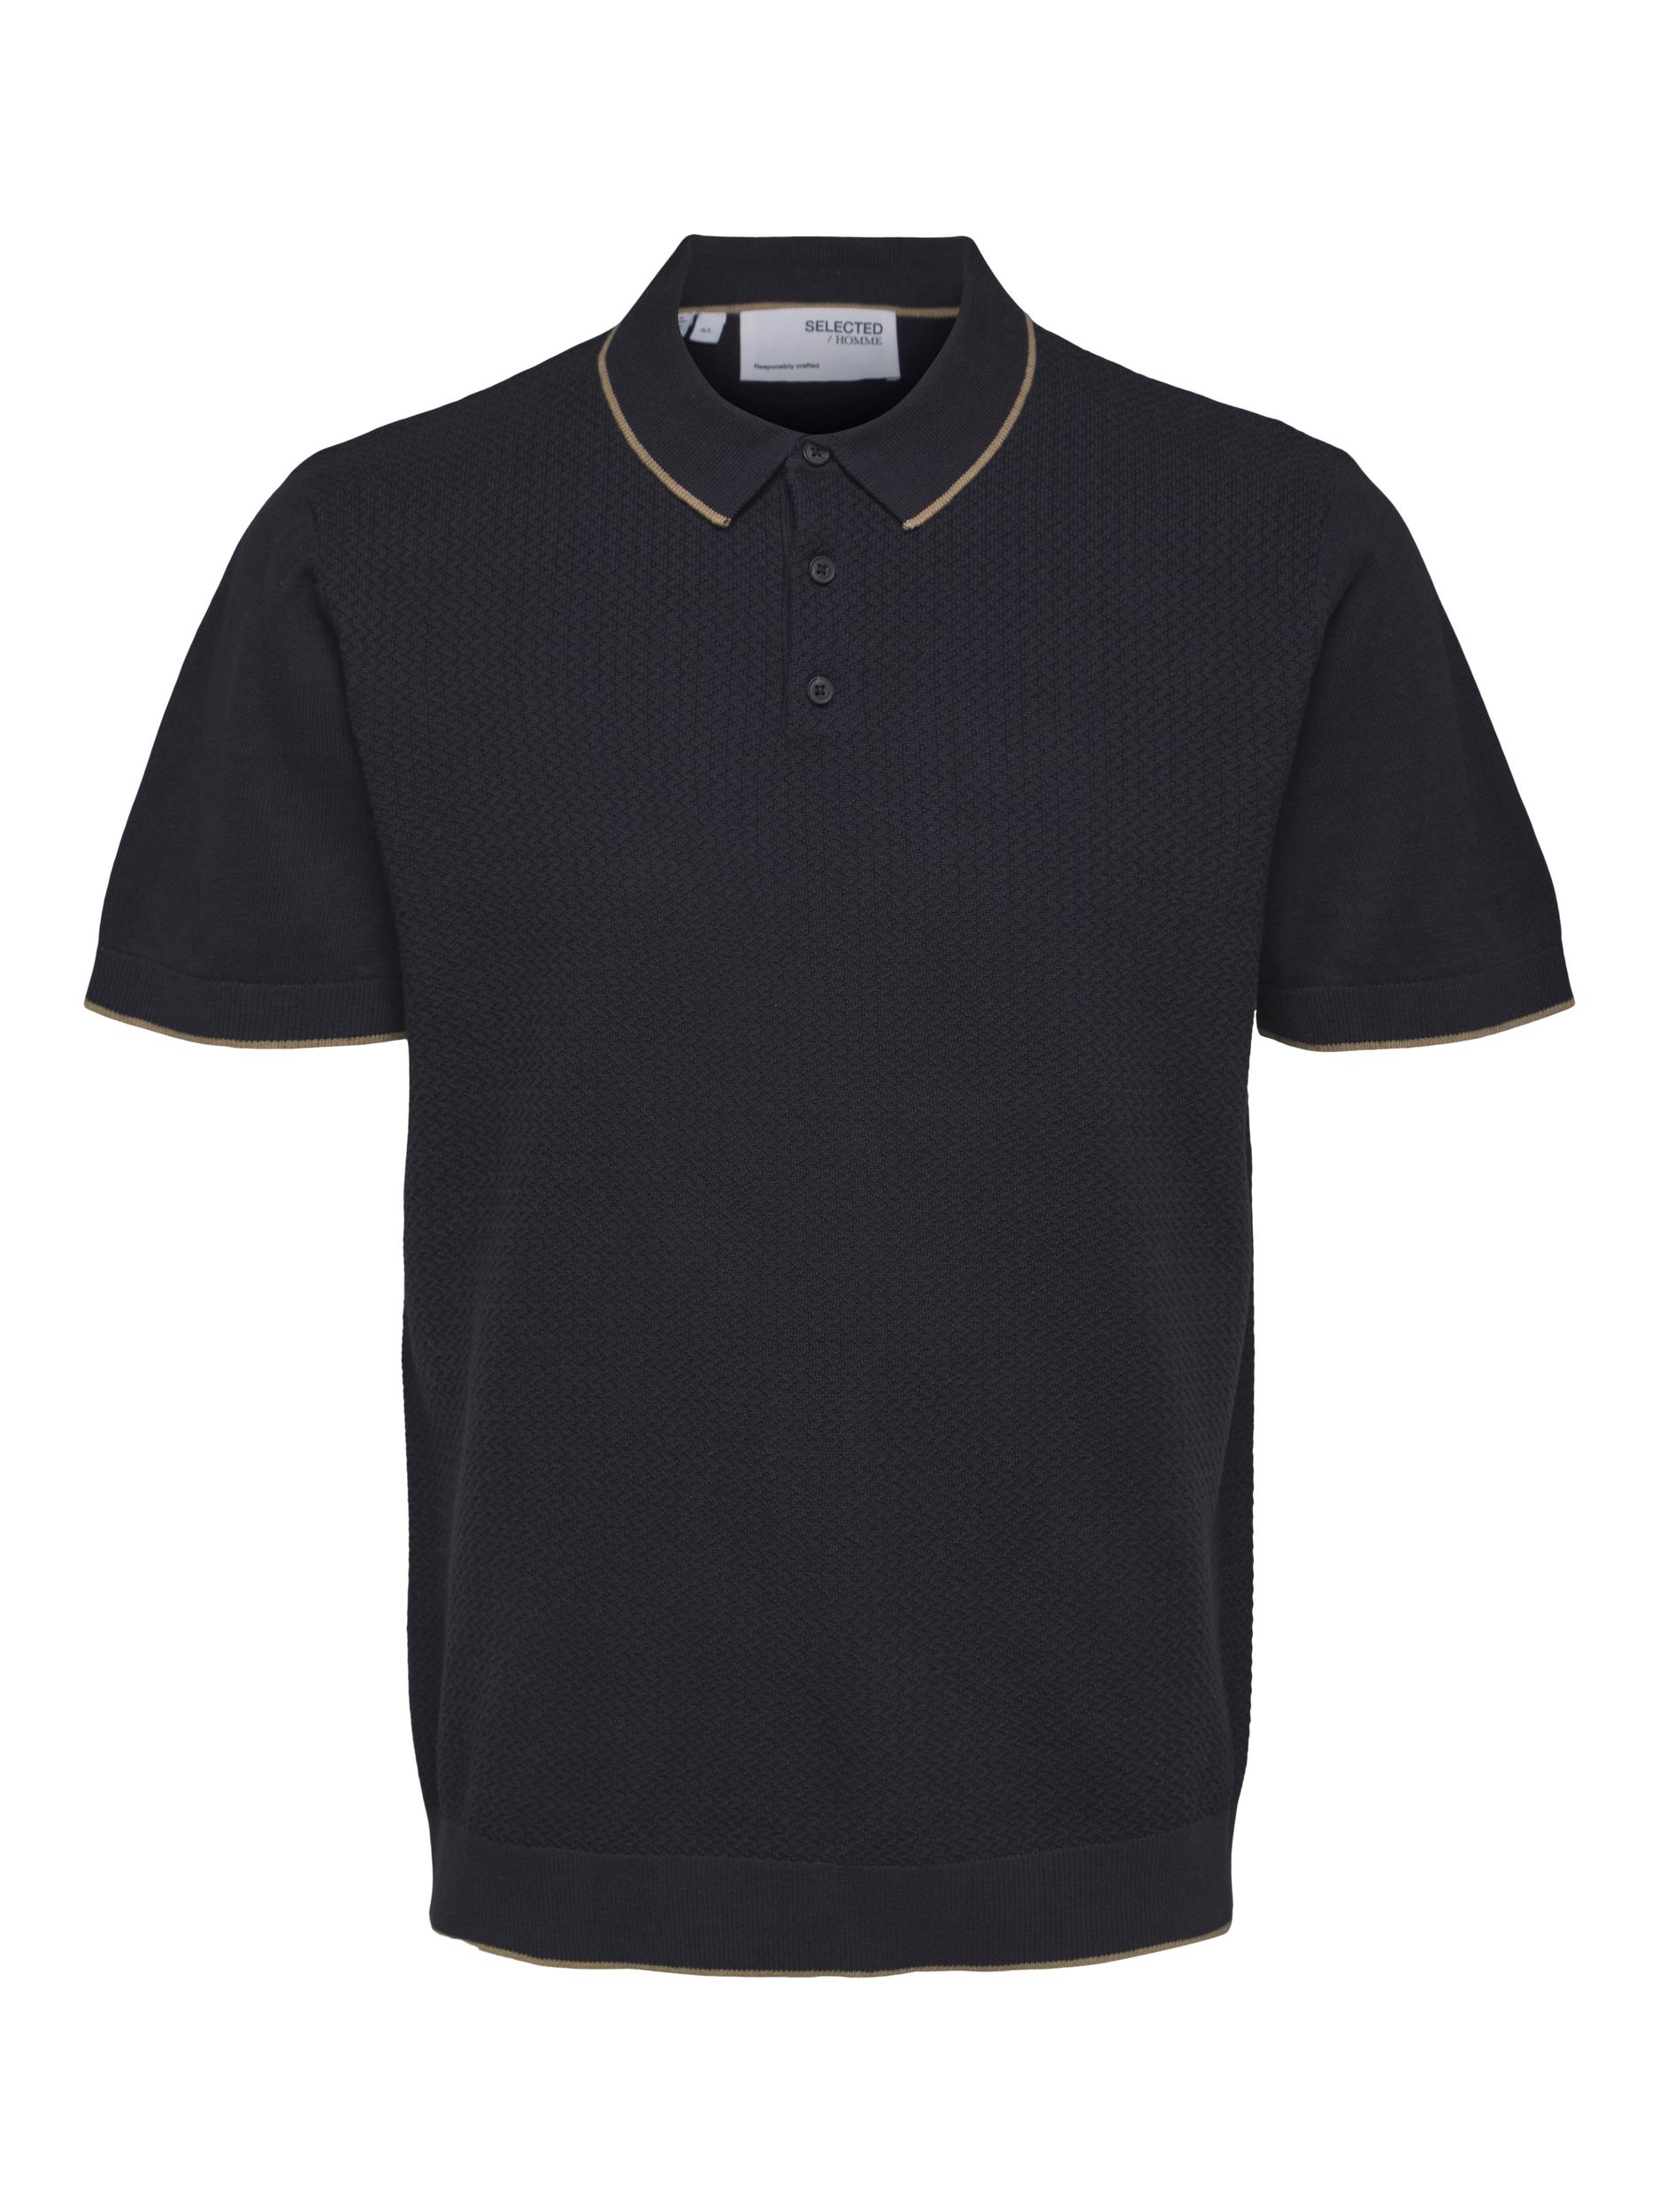 Selected Homme Hank Knitted Polo - Sky Captain 